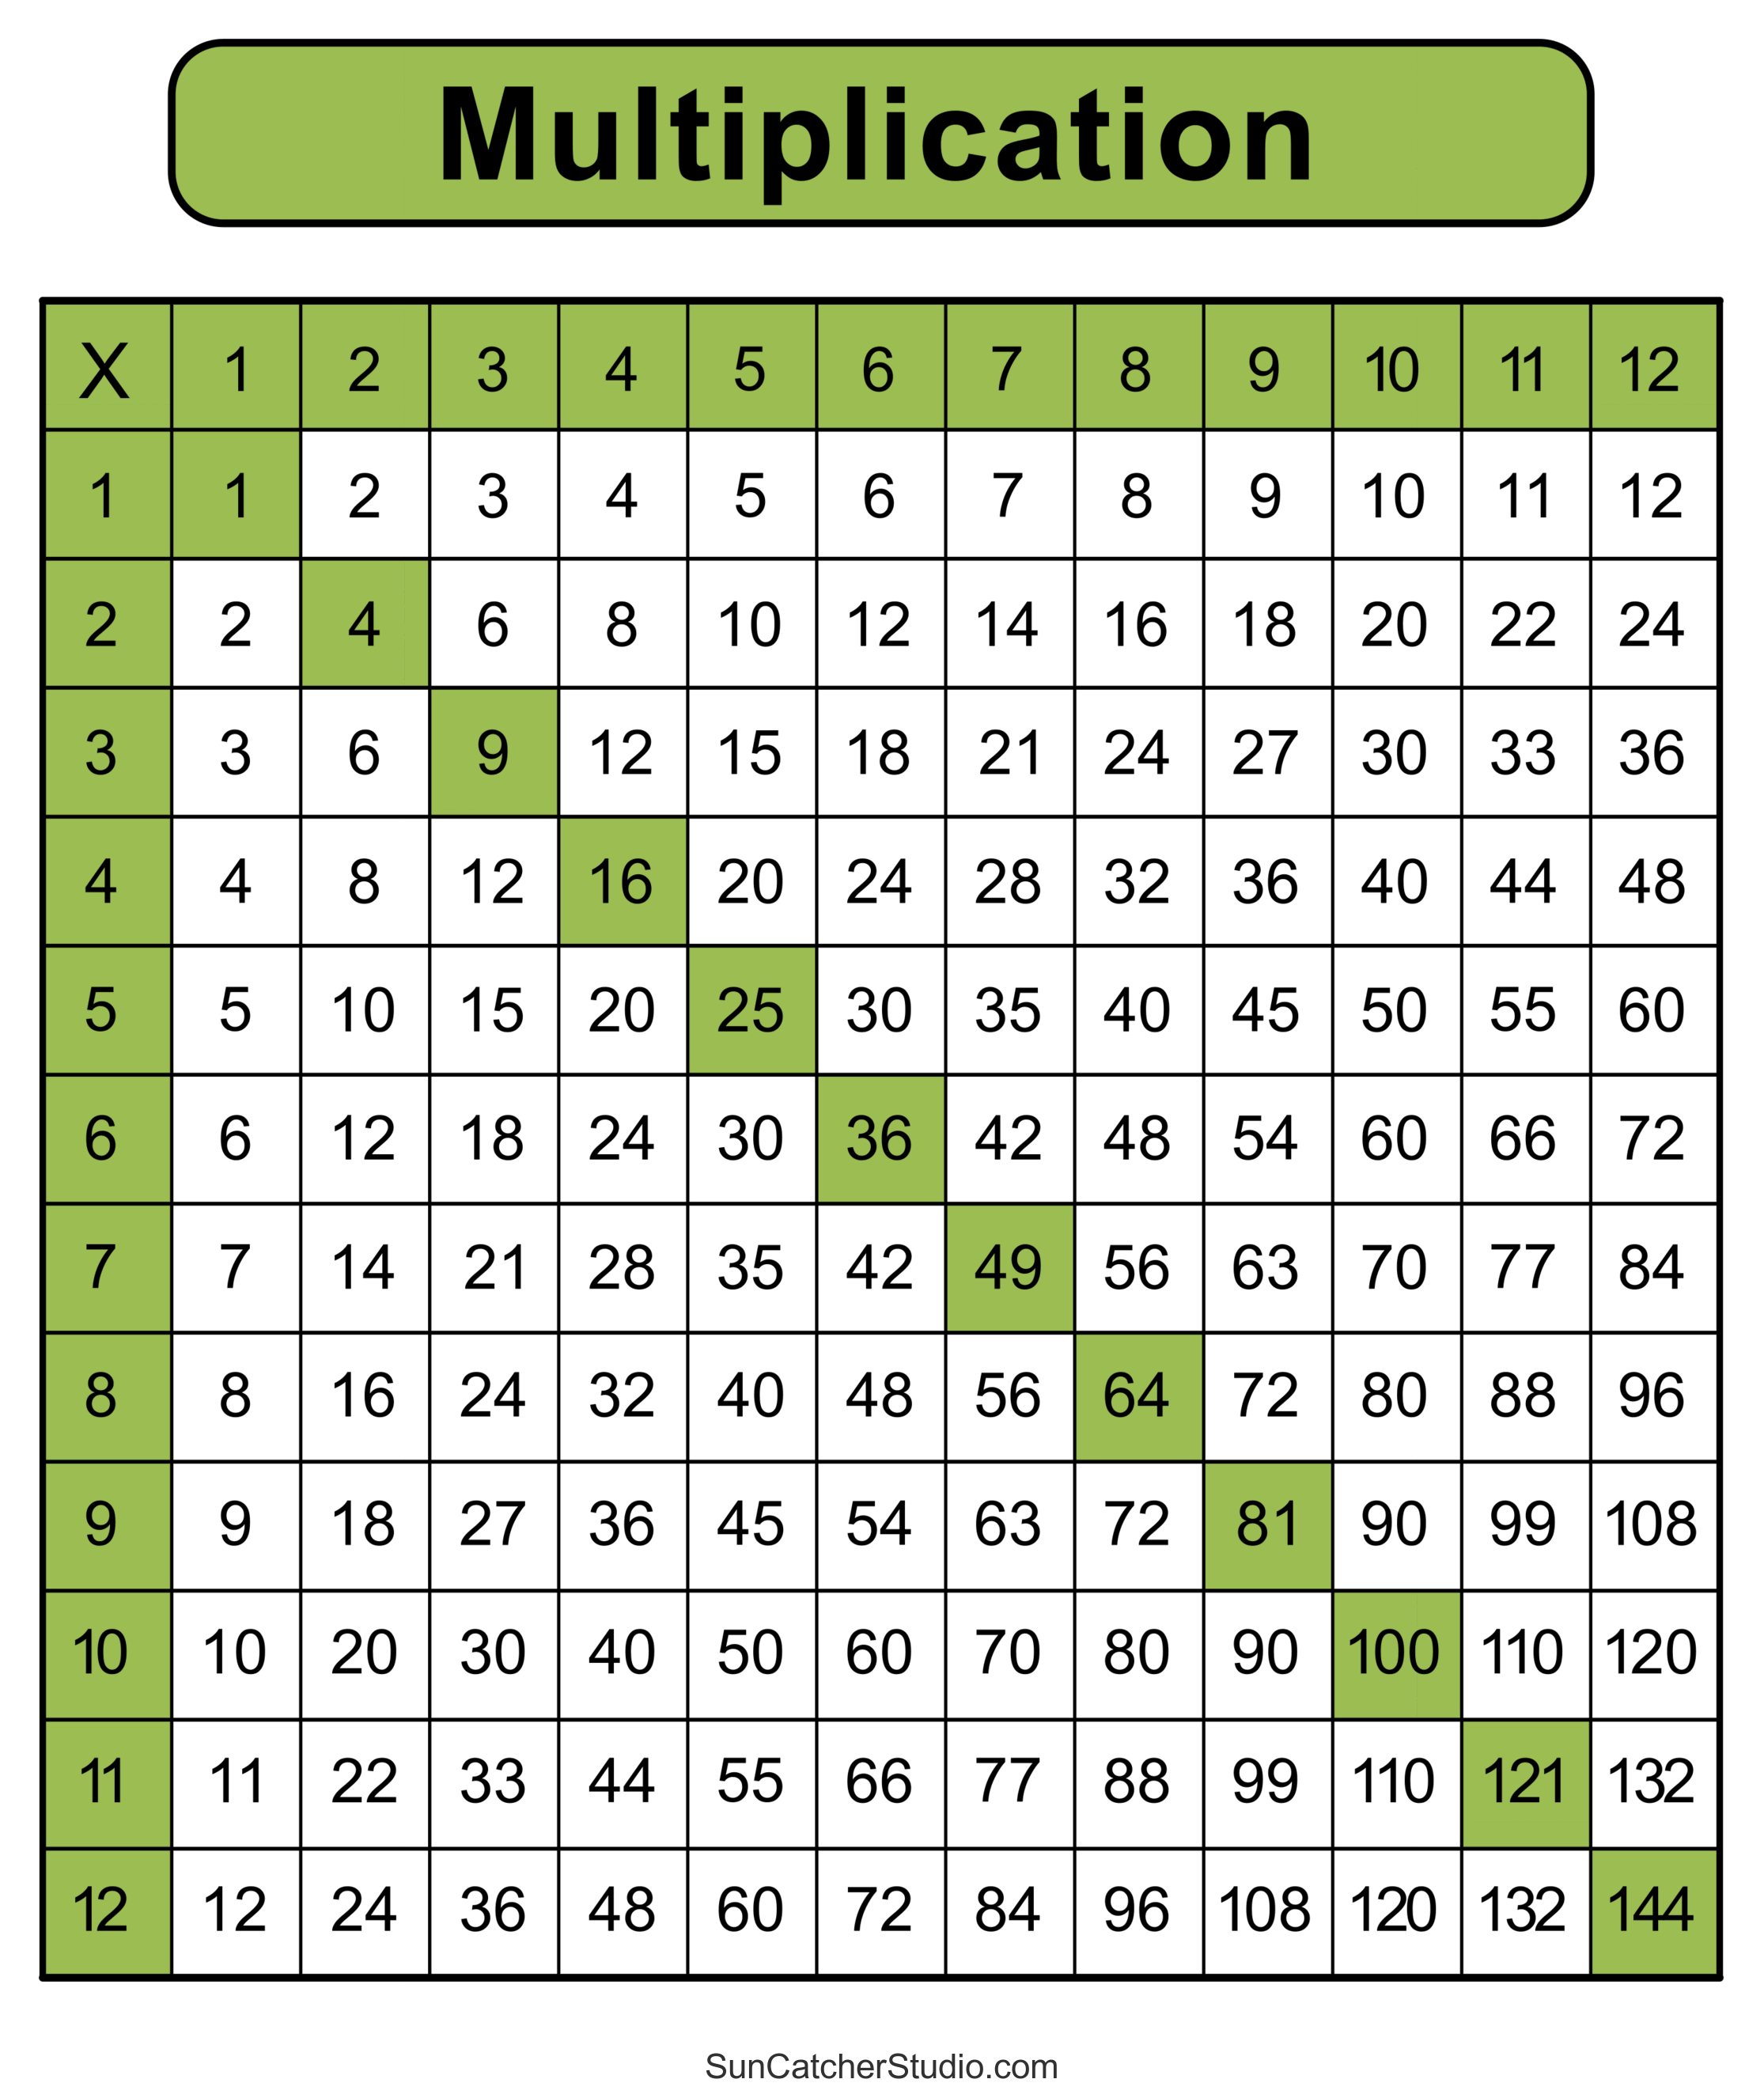 Multiplication Charts Pdf Free Printable Times Tables Diy Projects Patterns Monograms Designs Templates